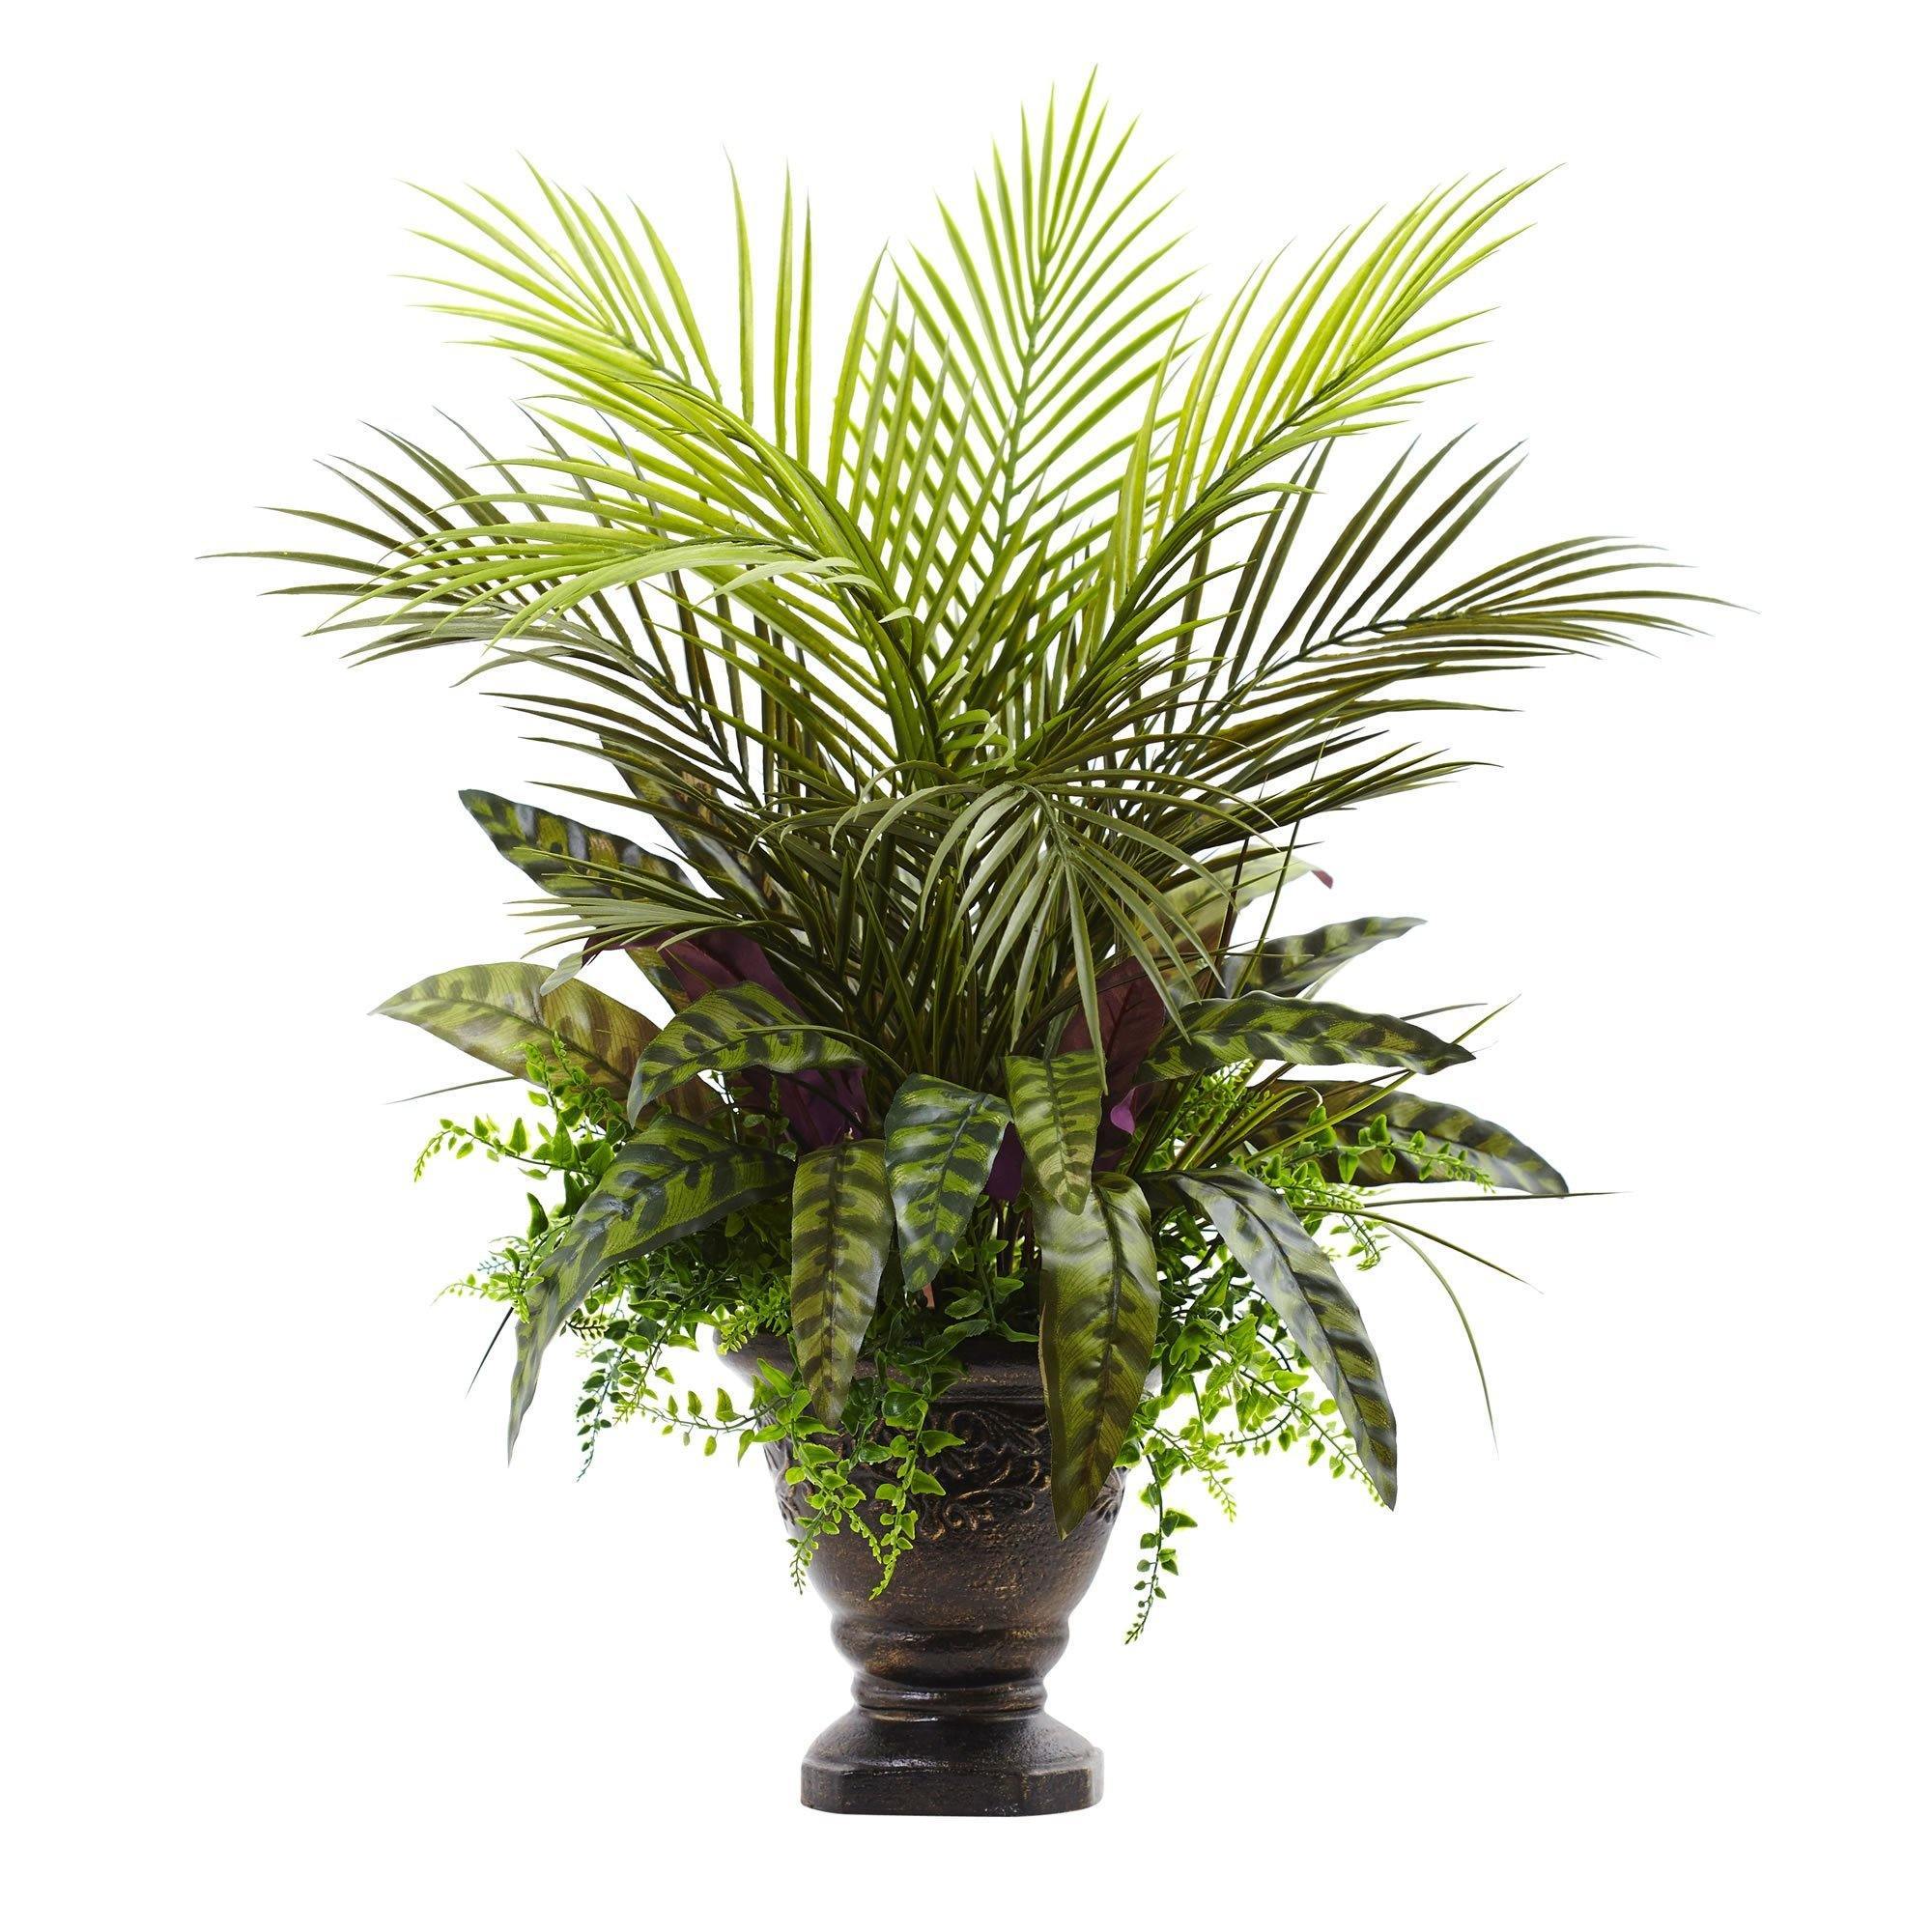 Artificial Arrangement - 27” Mixed Areca Palm, Fern & Peacock w/ Planter by Nearly Natural